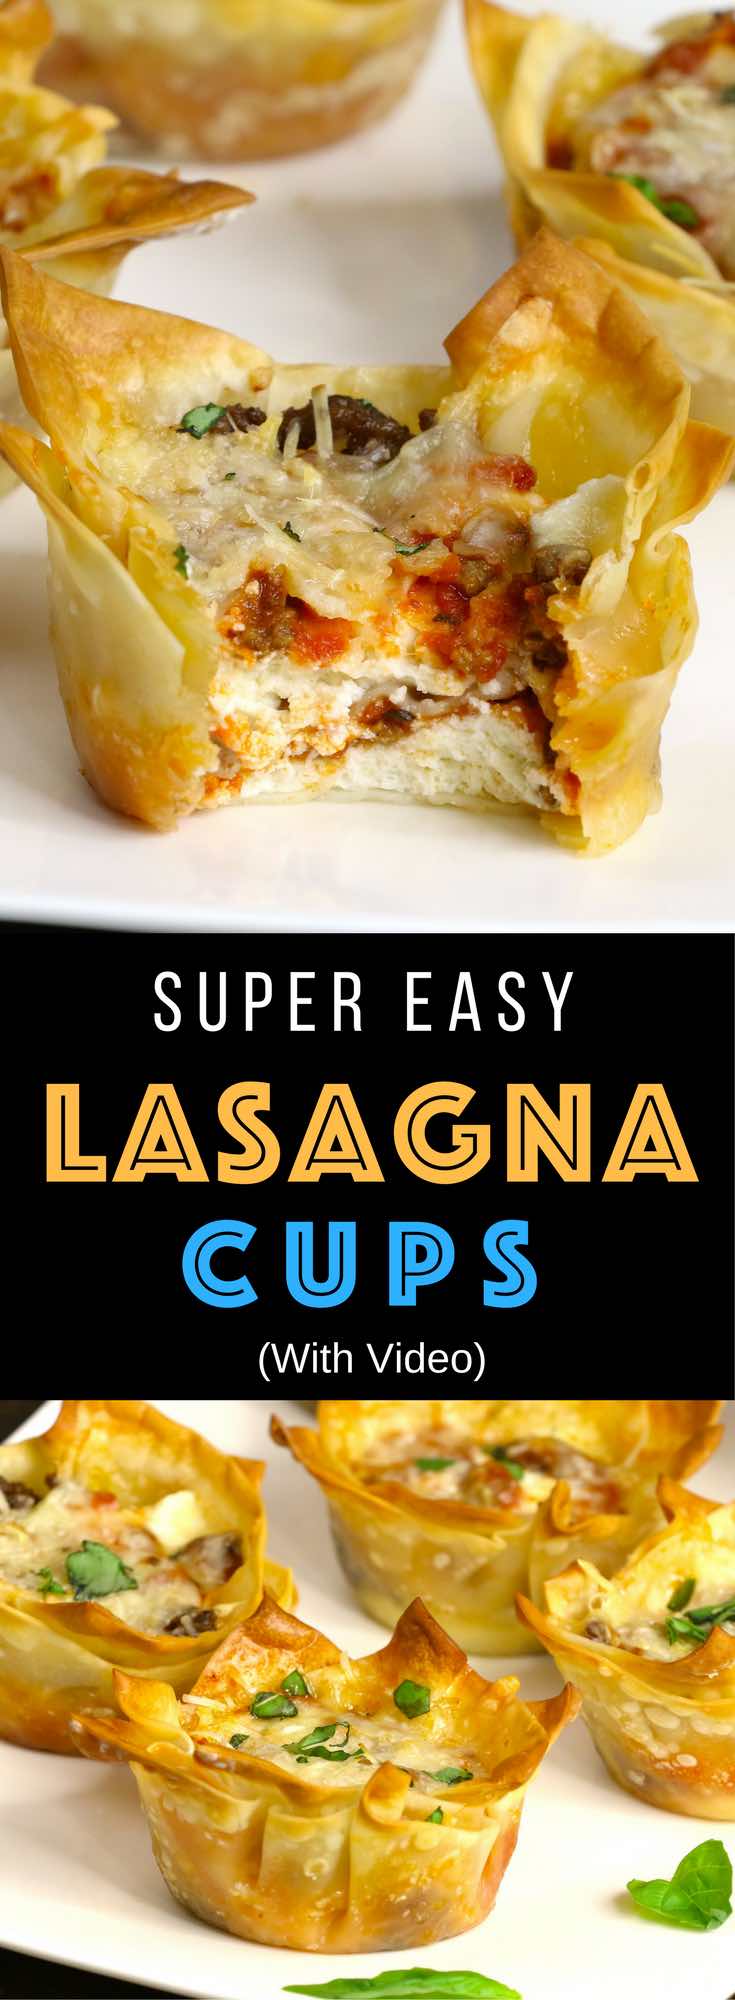 Mini Lasagna Cups: warm, crispy and cheesy handheld lasagna! Cooked ground beef, mozzarella, parmesan, ricotta, and pizza sauce baked inside of wonton wrappers in a muffin tin! The easiest lasagna you will ever make – the perfect snack, lunch or quick weeknight dinner! Quick and easy recipe. Party food, easy dinner. Video recipe. | Tipbuzz.com